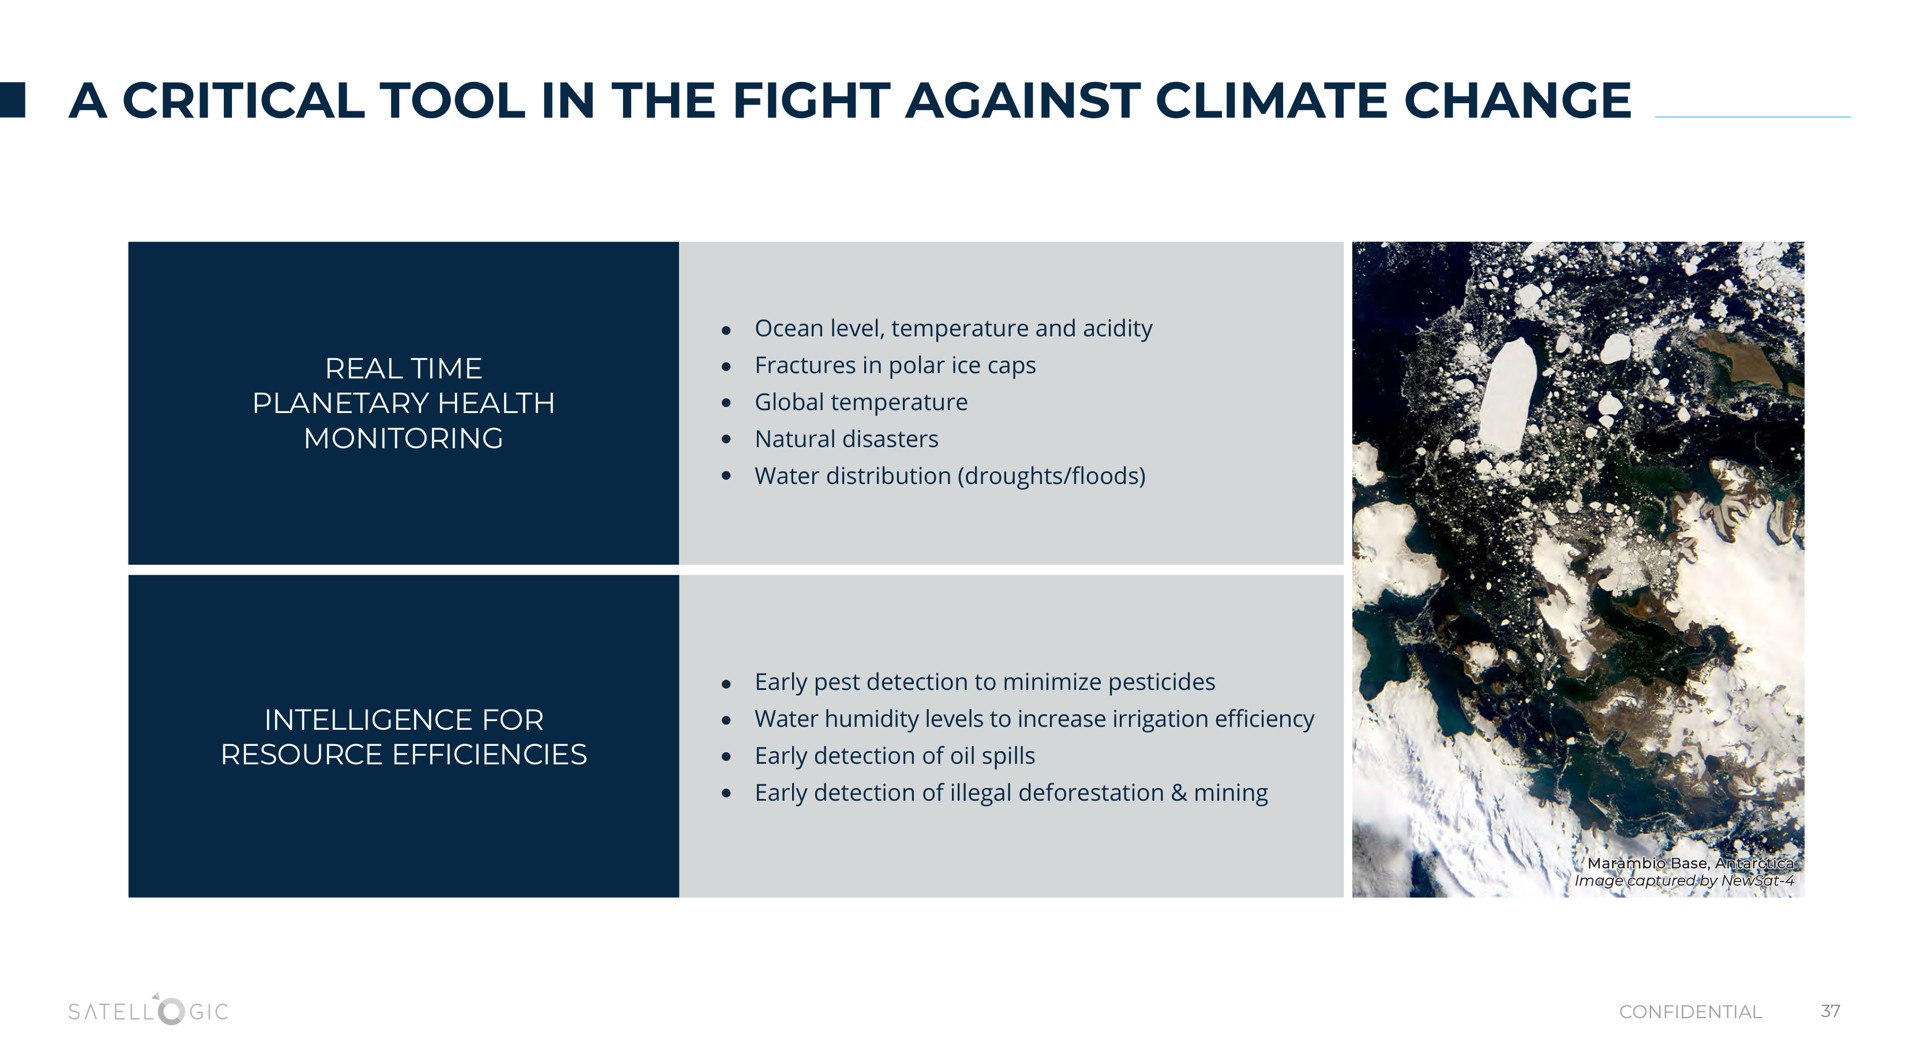 a critical tool in the fight against climate change | Satellogic